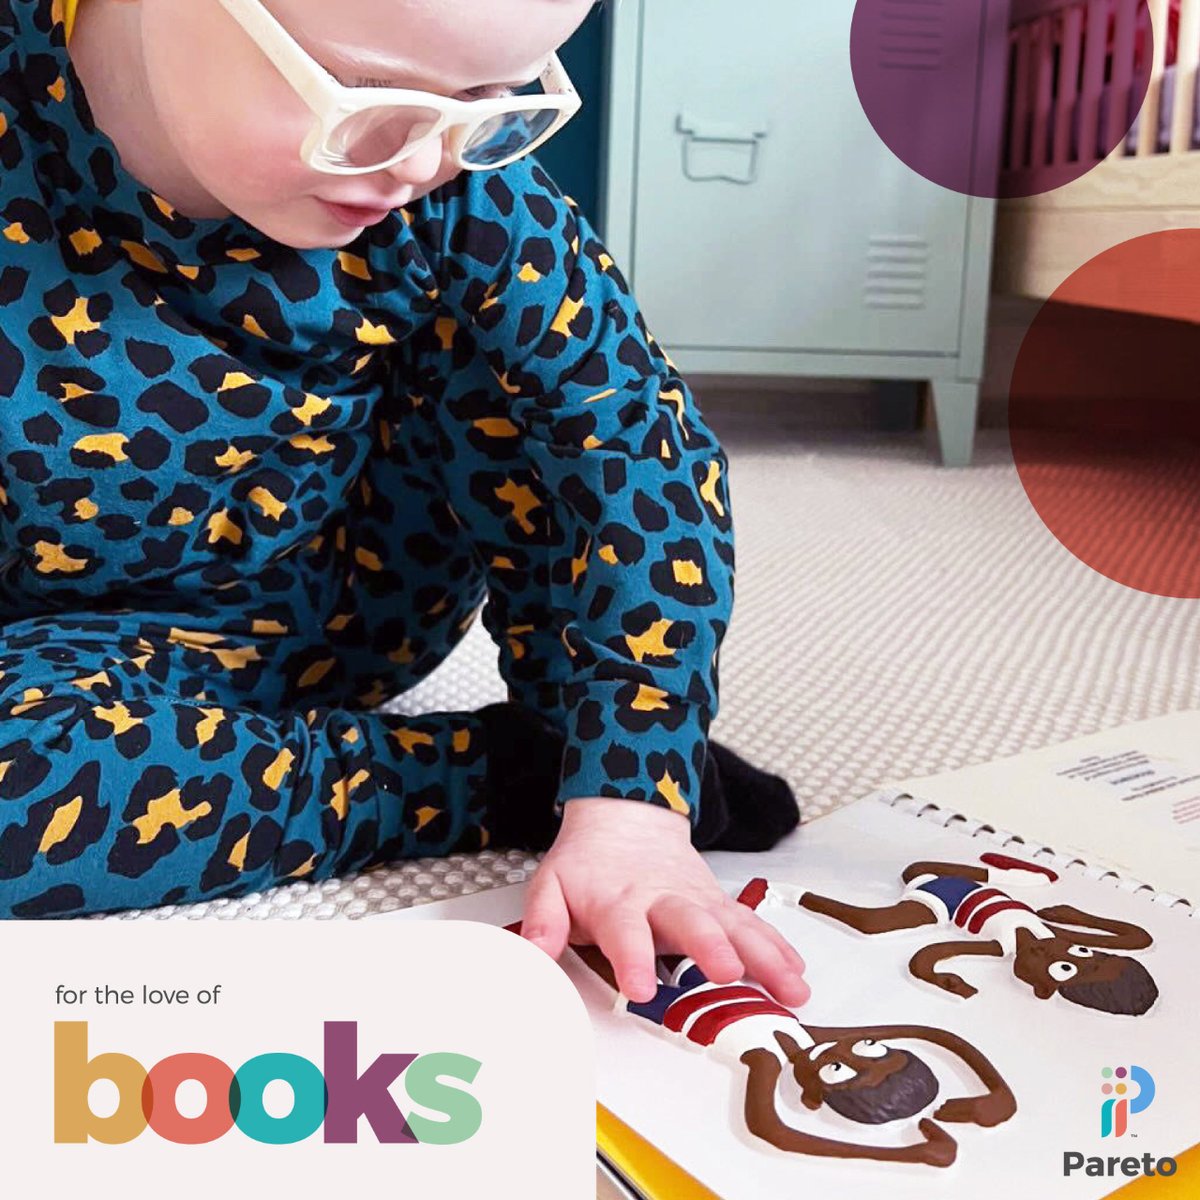 We believe in the importance of giving young people the opportunity to develop a love of books. Thats why this year we've partnered with @LivingPaintings a charity providing 'Touch to See' audio tactile books for blind and partially sighted people. #WorldBookDay #InclusionMatters